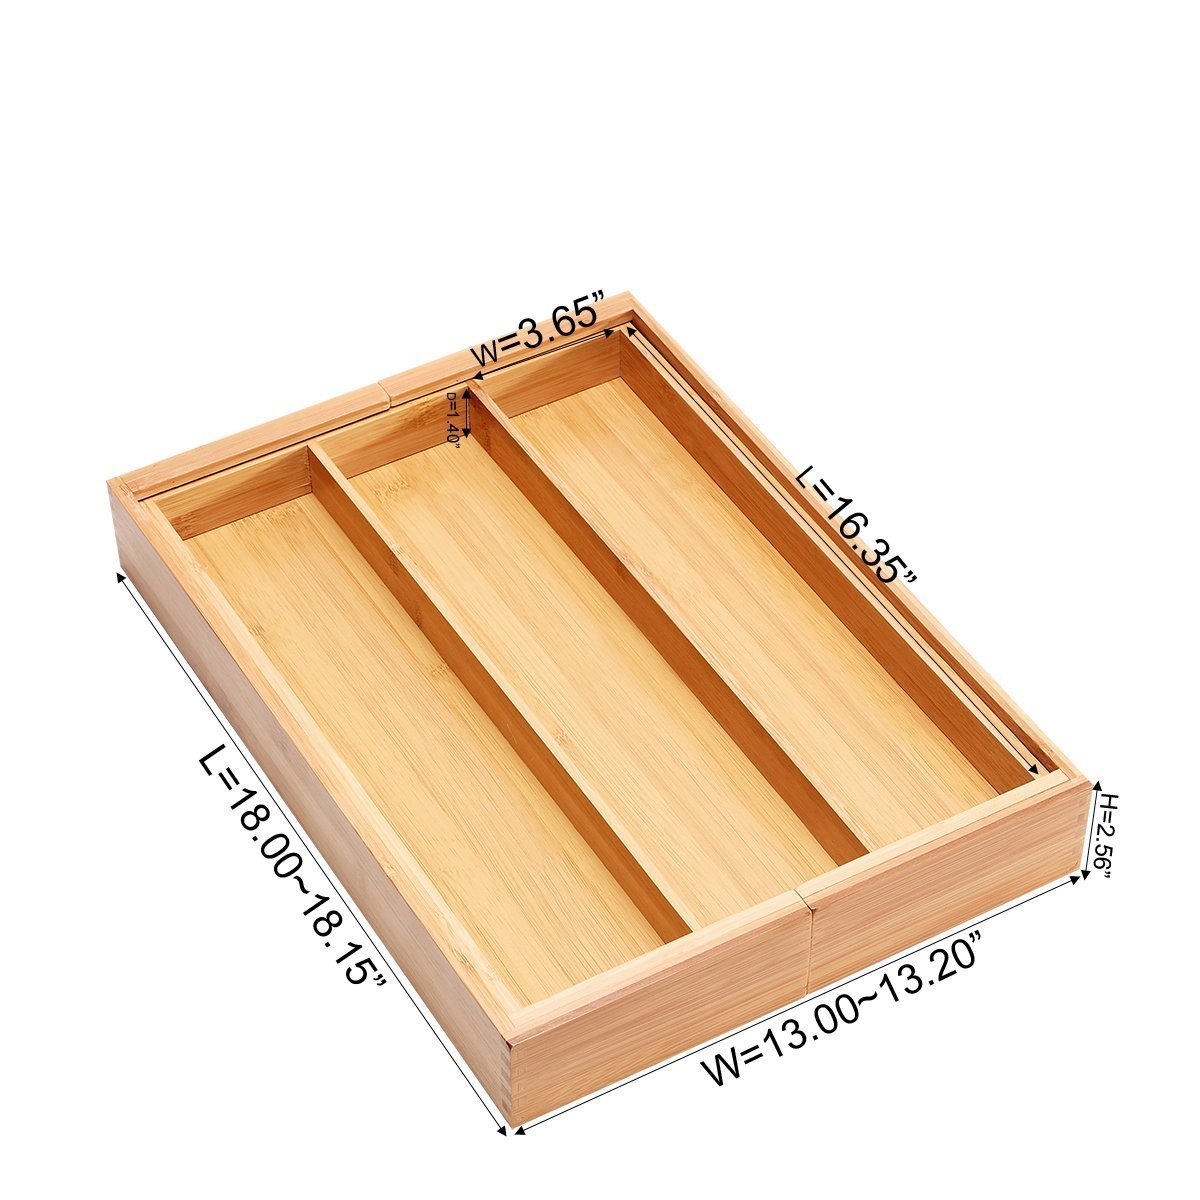 Storage organizer bamboo expandable utensil cutlery tray drawer organizer divider 3 compartments with 2 adjustable dimensions beautiful durable and multifunctional utensil holder and organizer